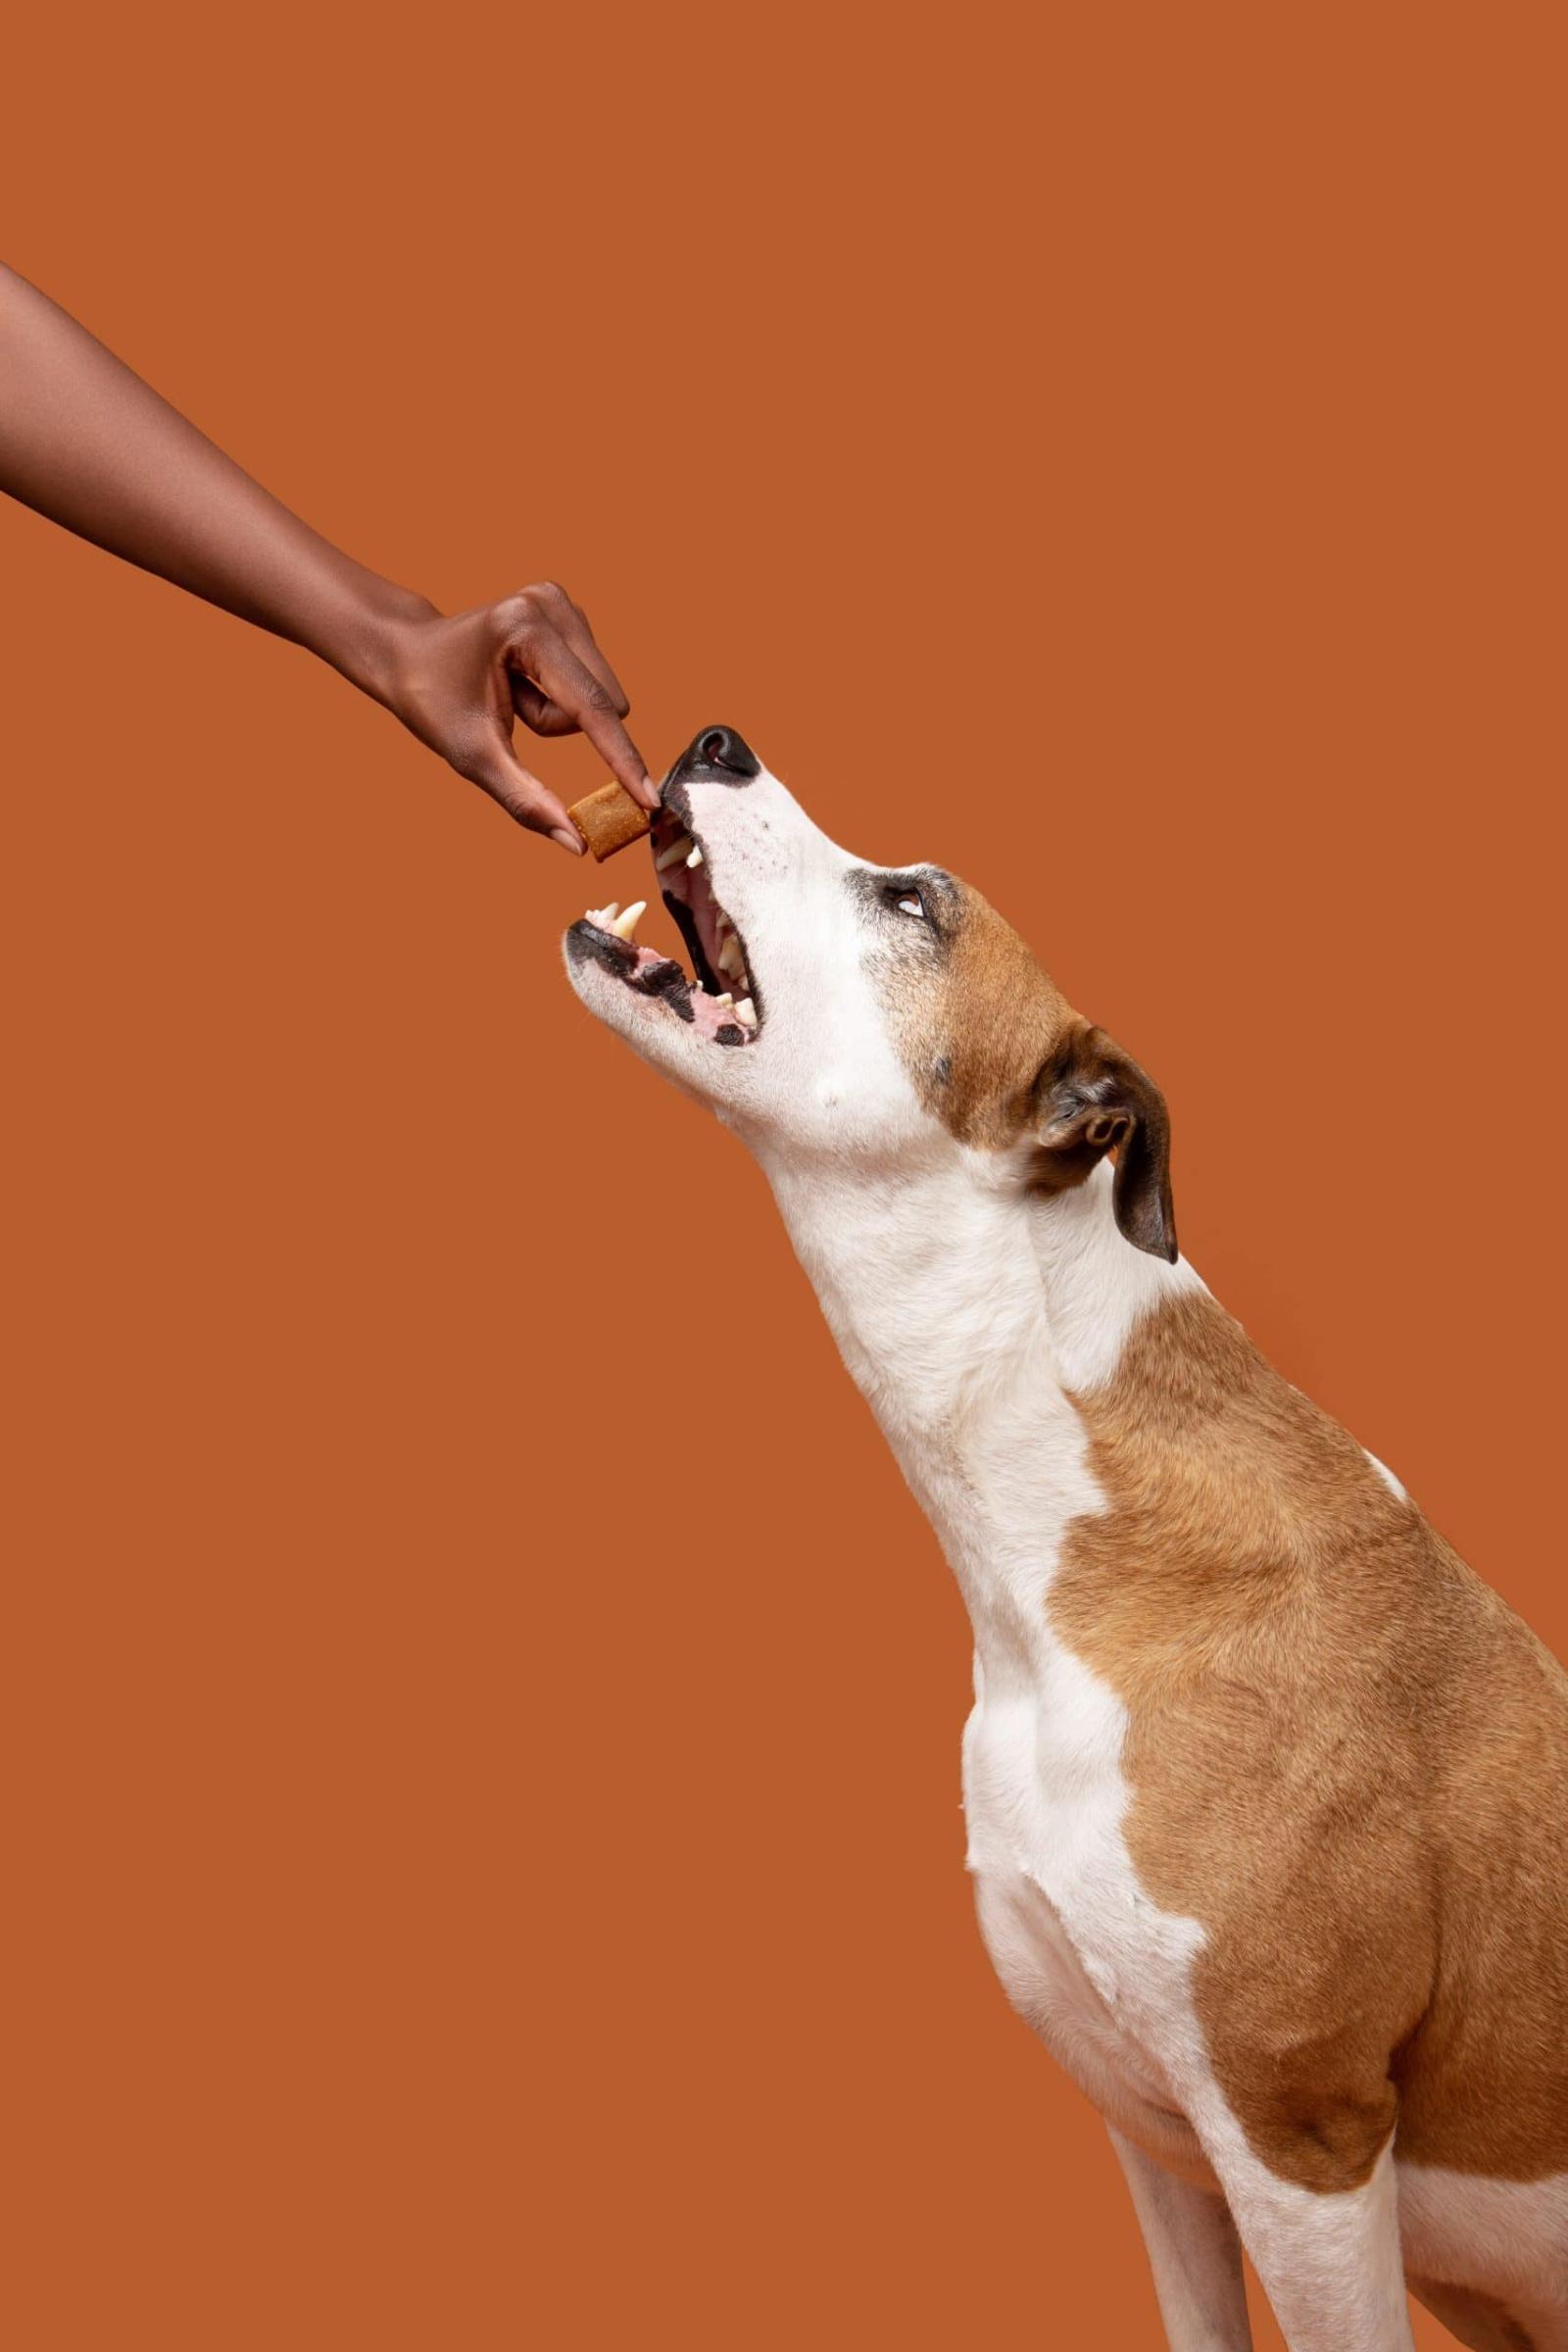 Pet Releaf Calming Chews for Dogs